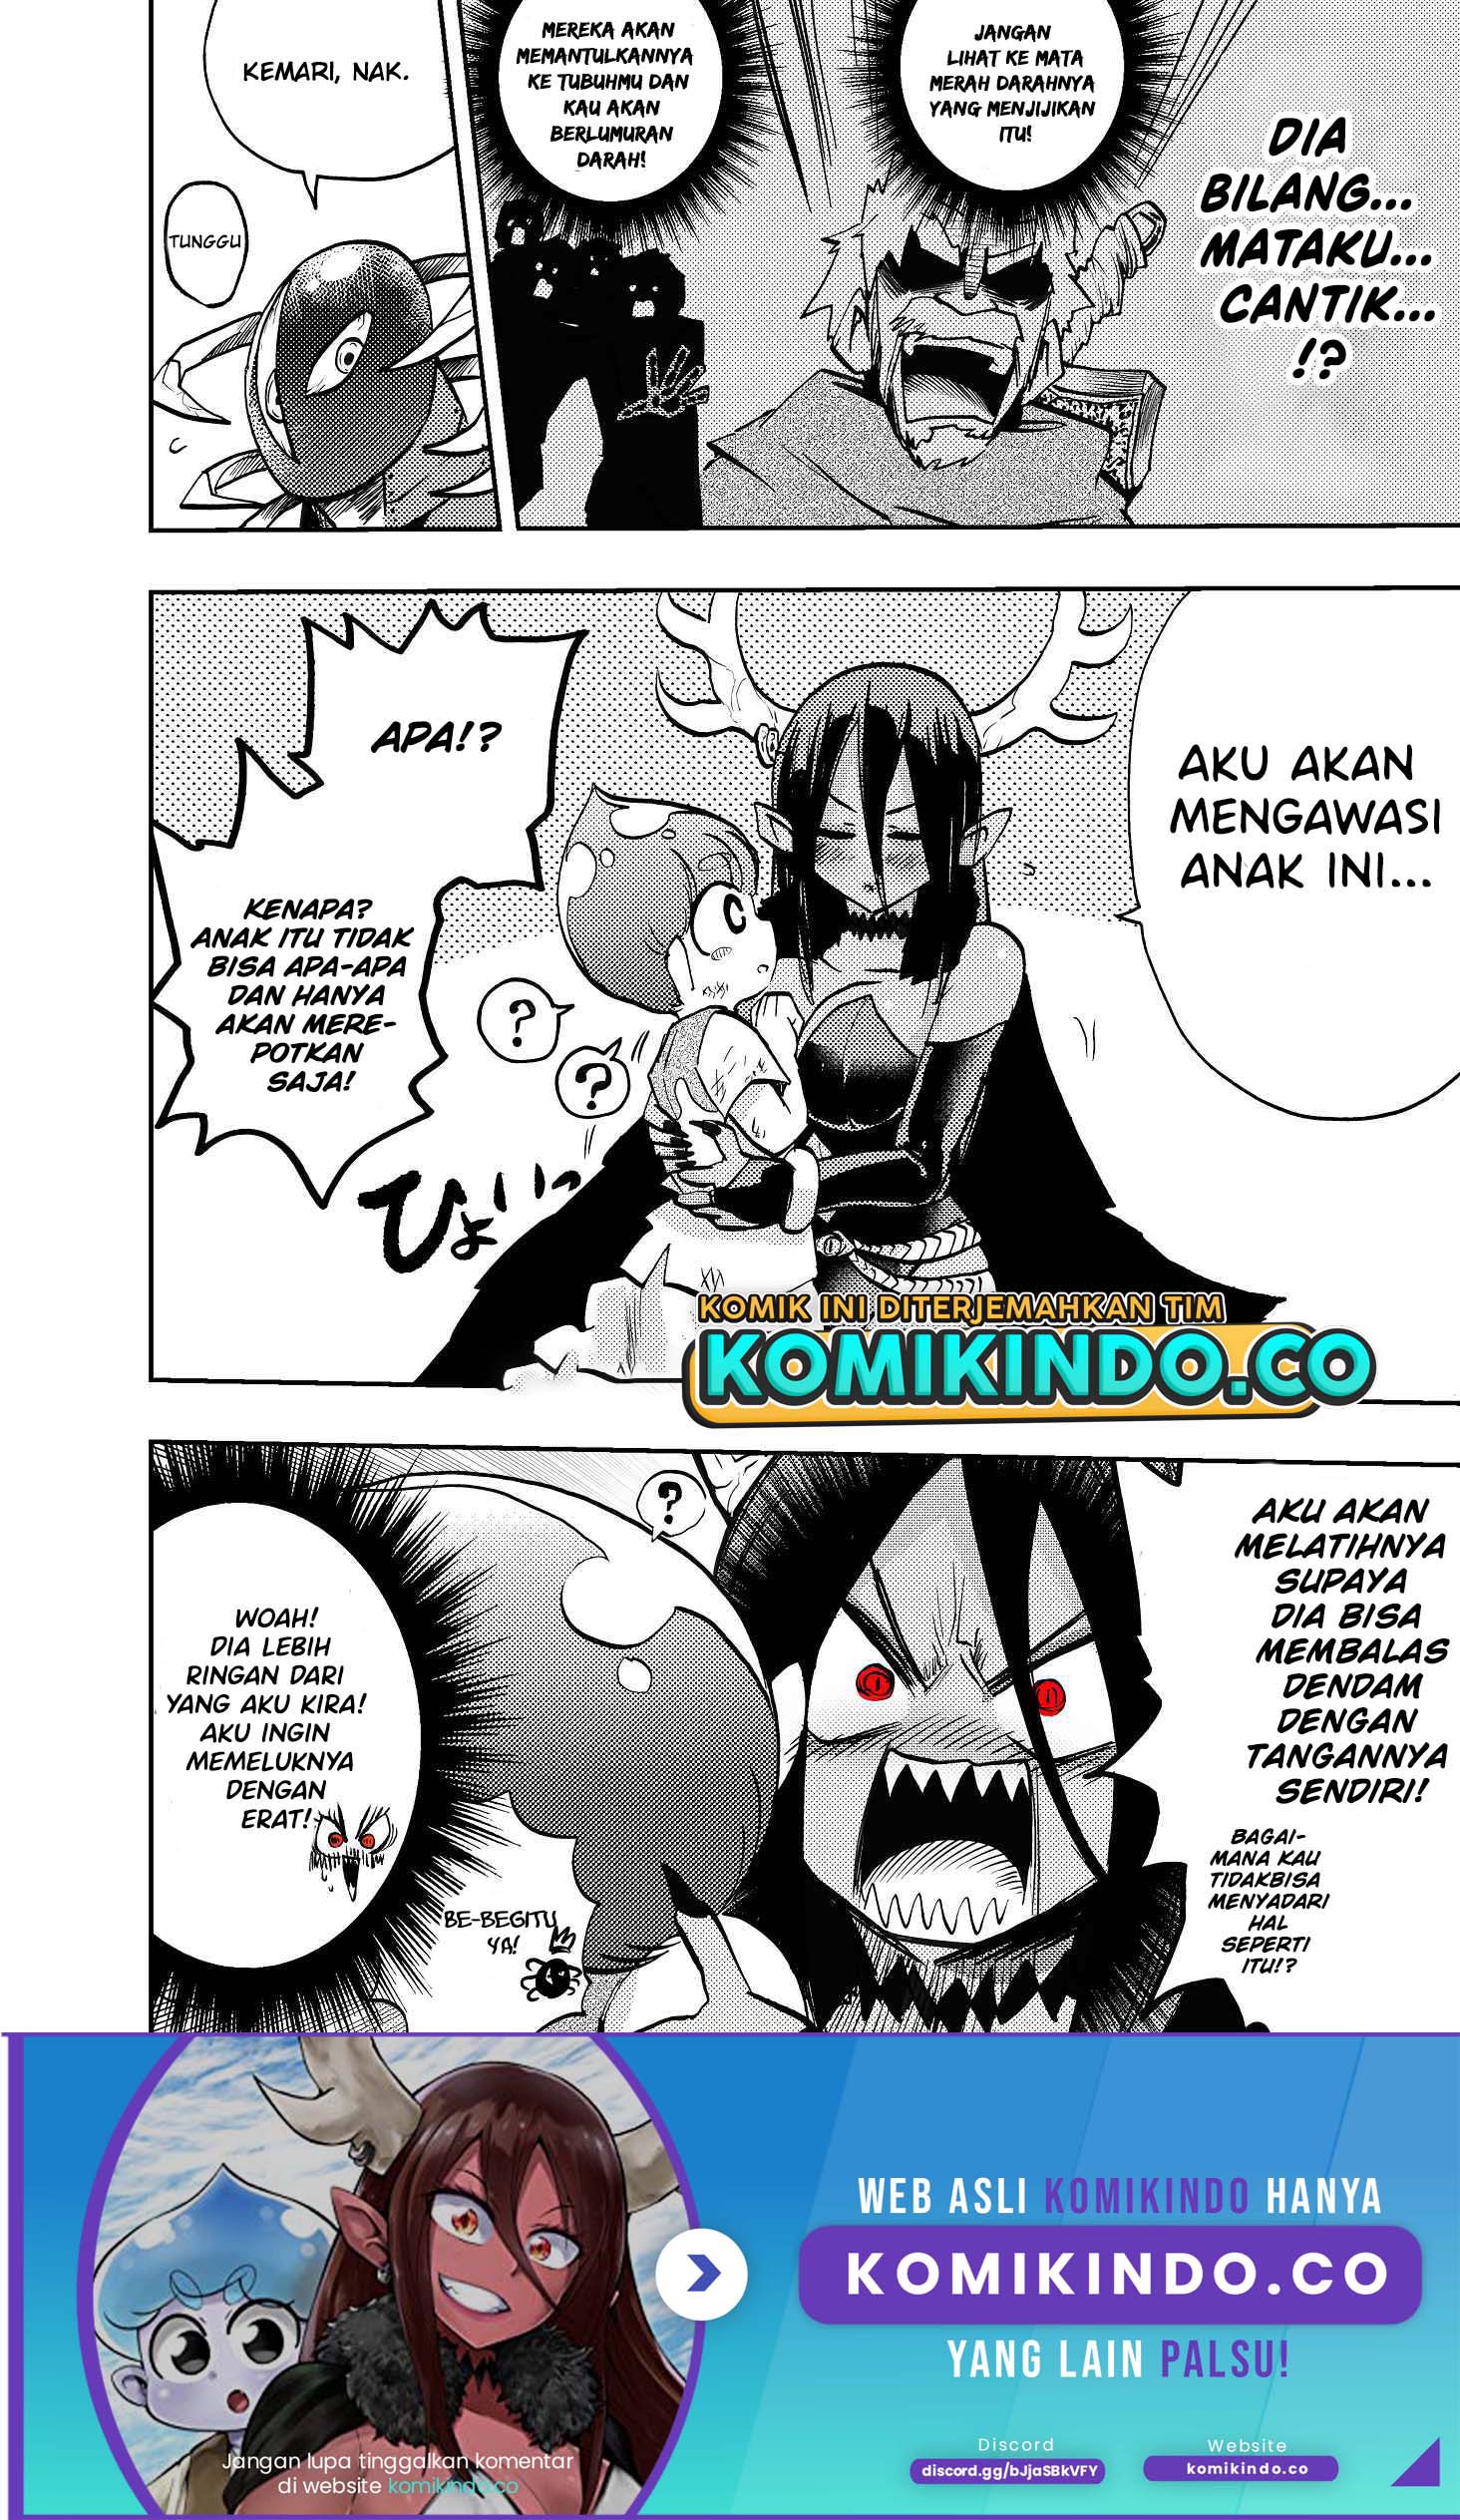 Level 999 Demon Lord and a Level 1 Slime Chapter 01